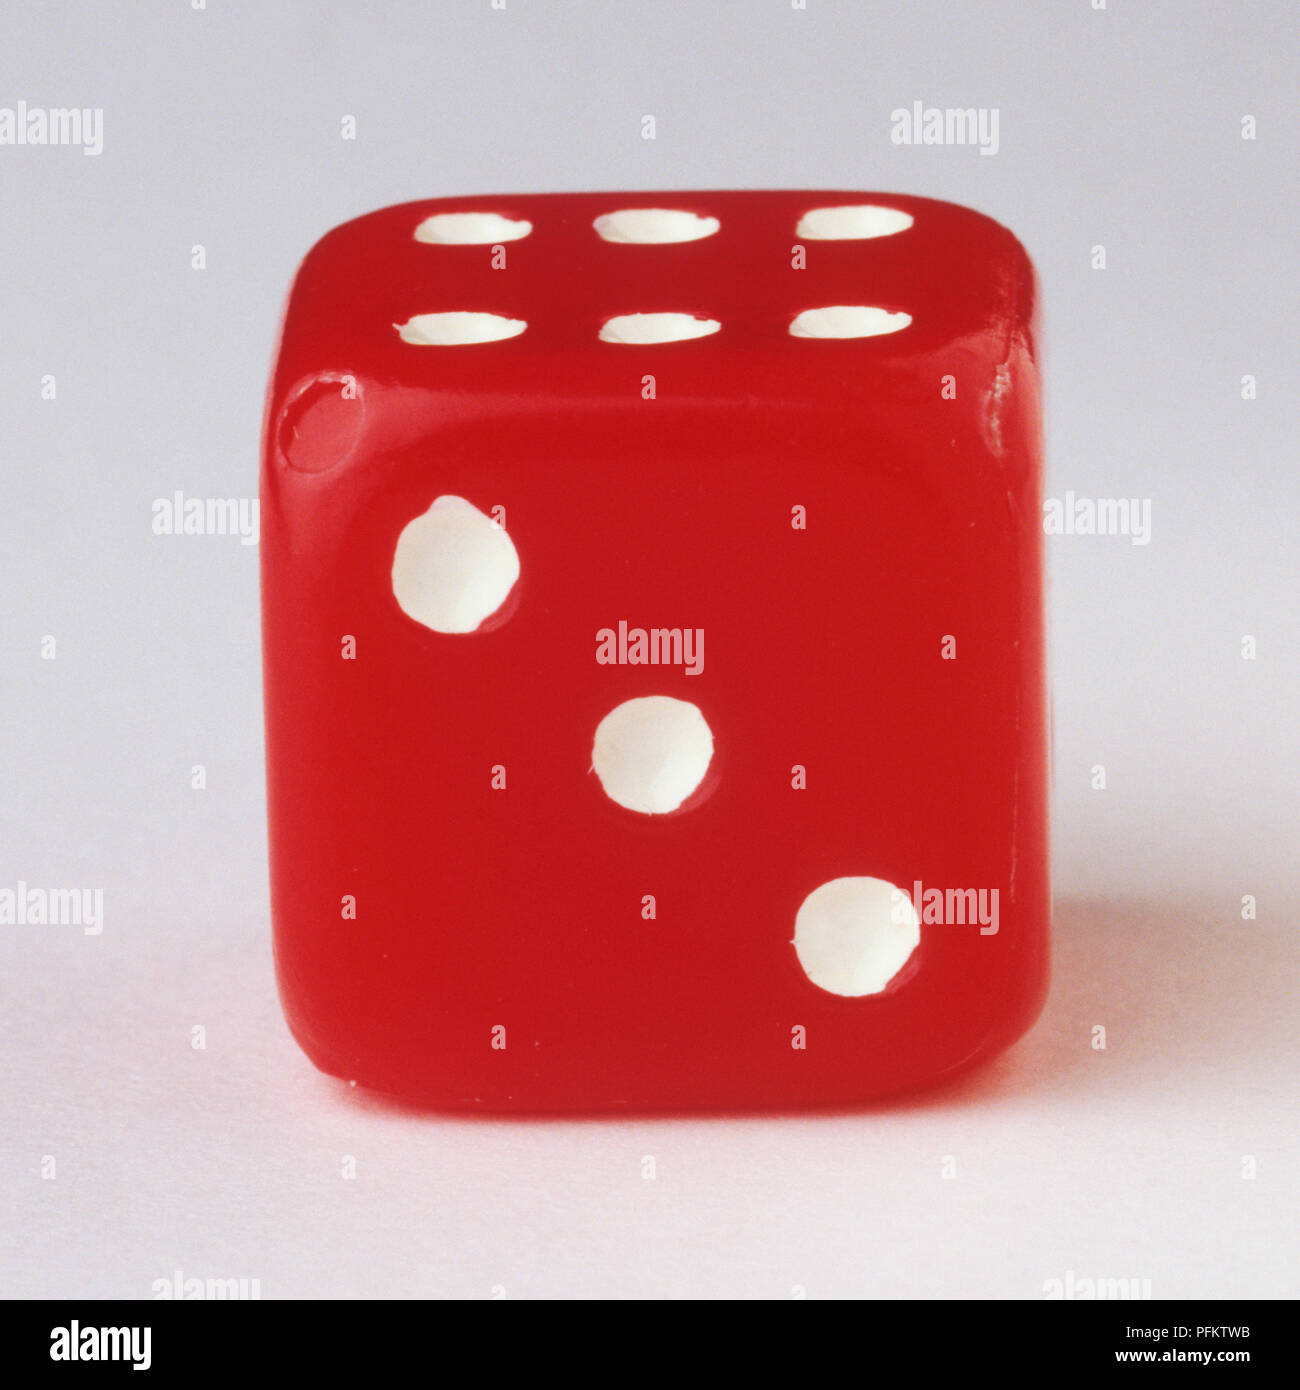 One red dice showing three white dots. Stock Photo